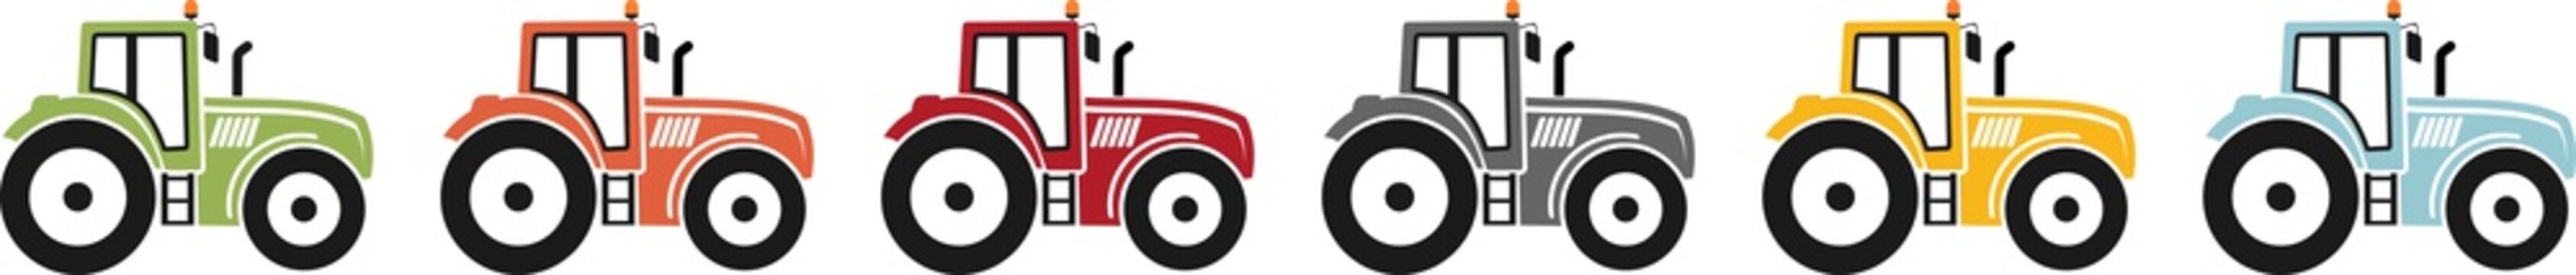 Coloured icon of a tractor for agriculture